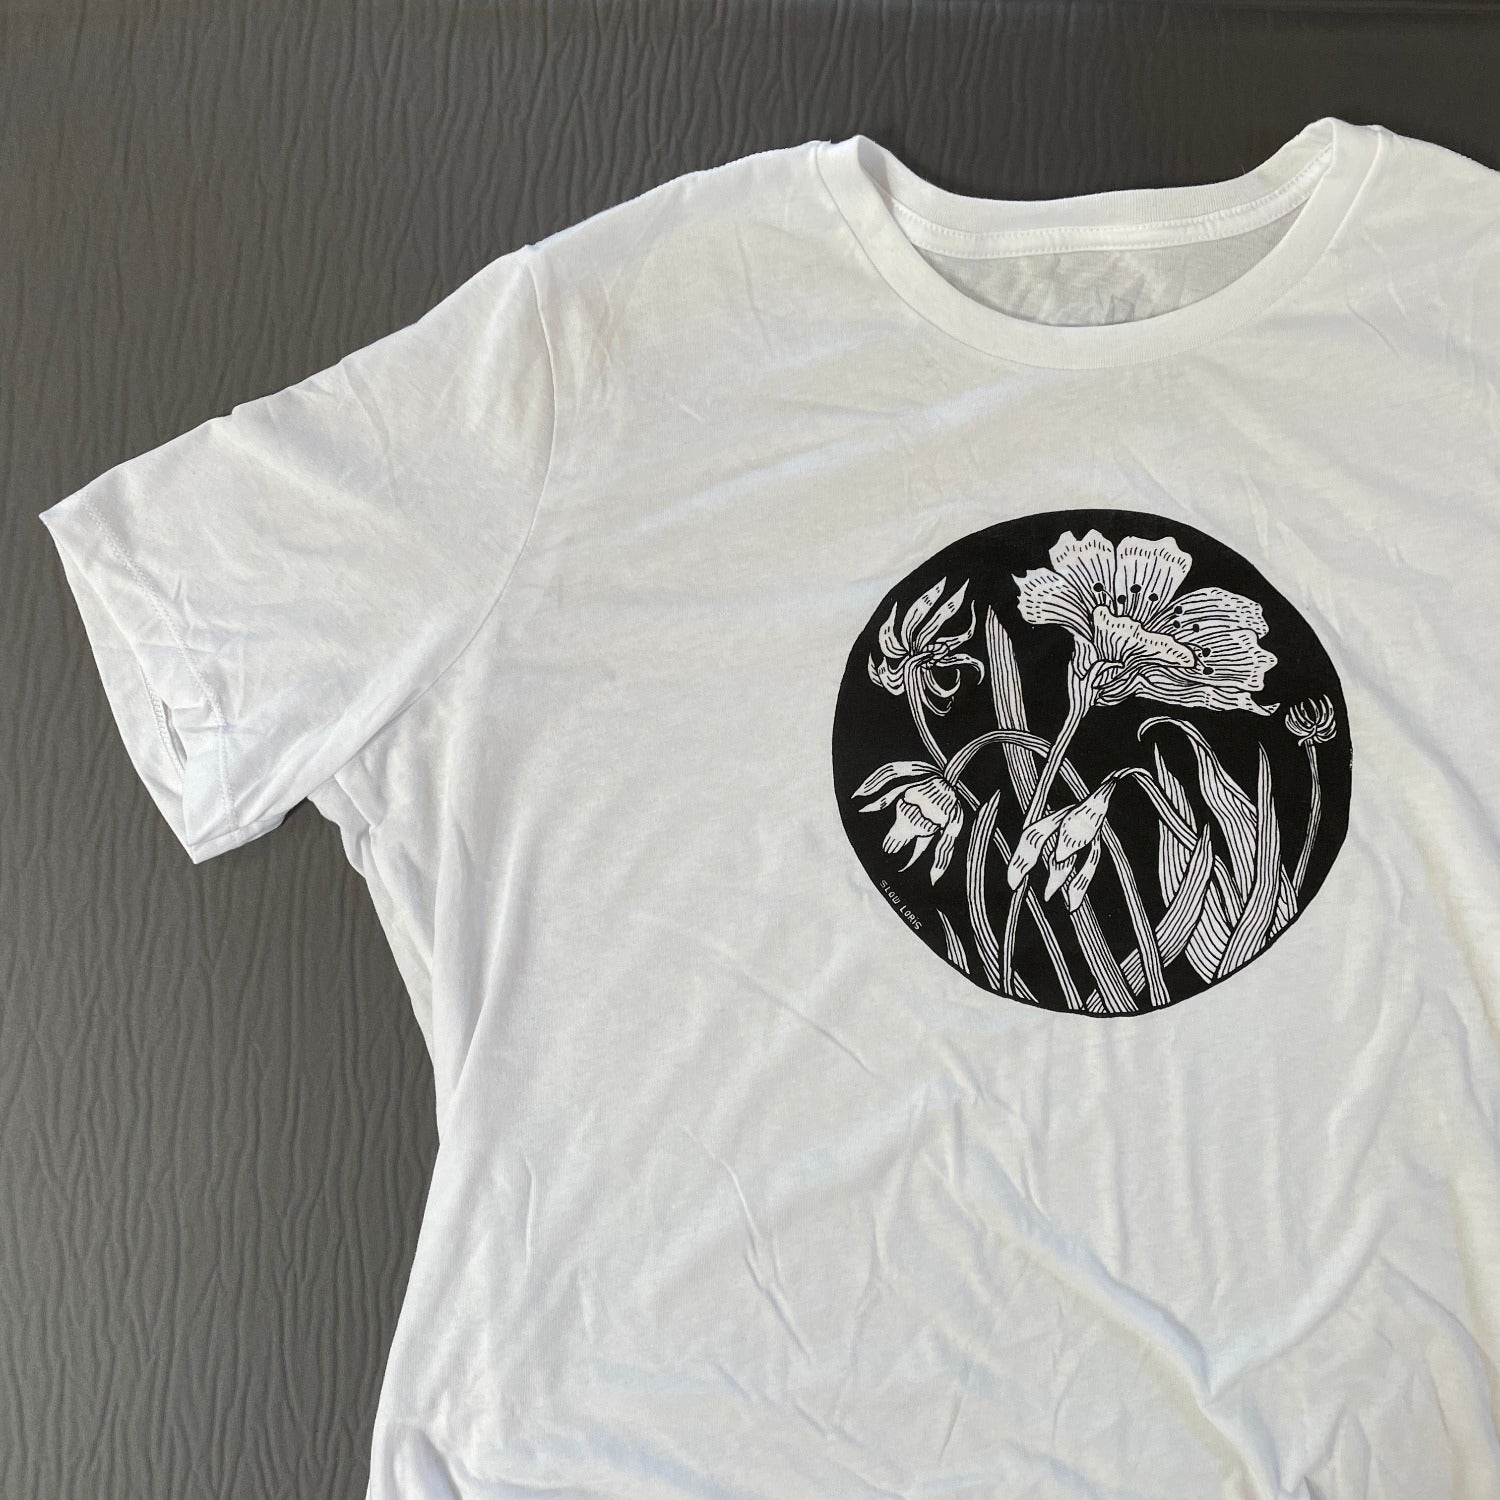 close up of white t shirt with black ink of an evening star flower and leaves framed in a circle. The background of the image is black and the flower line is white(the color of the shirt)